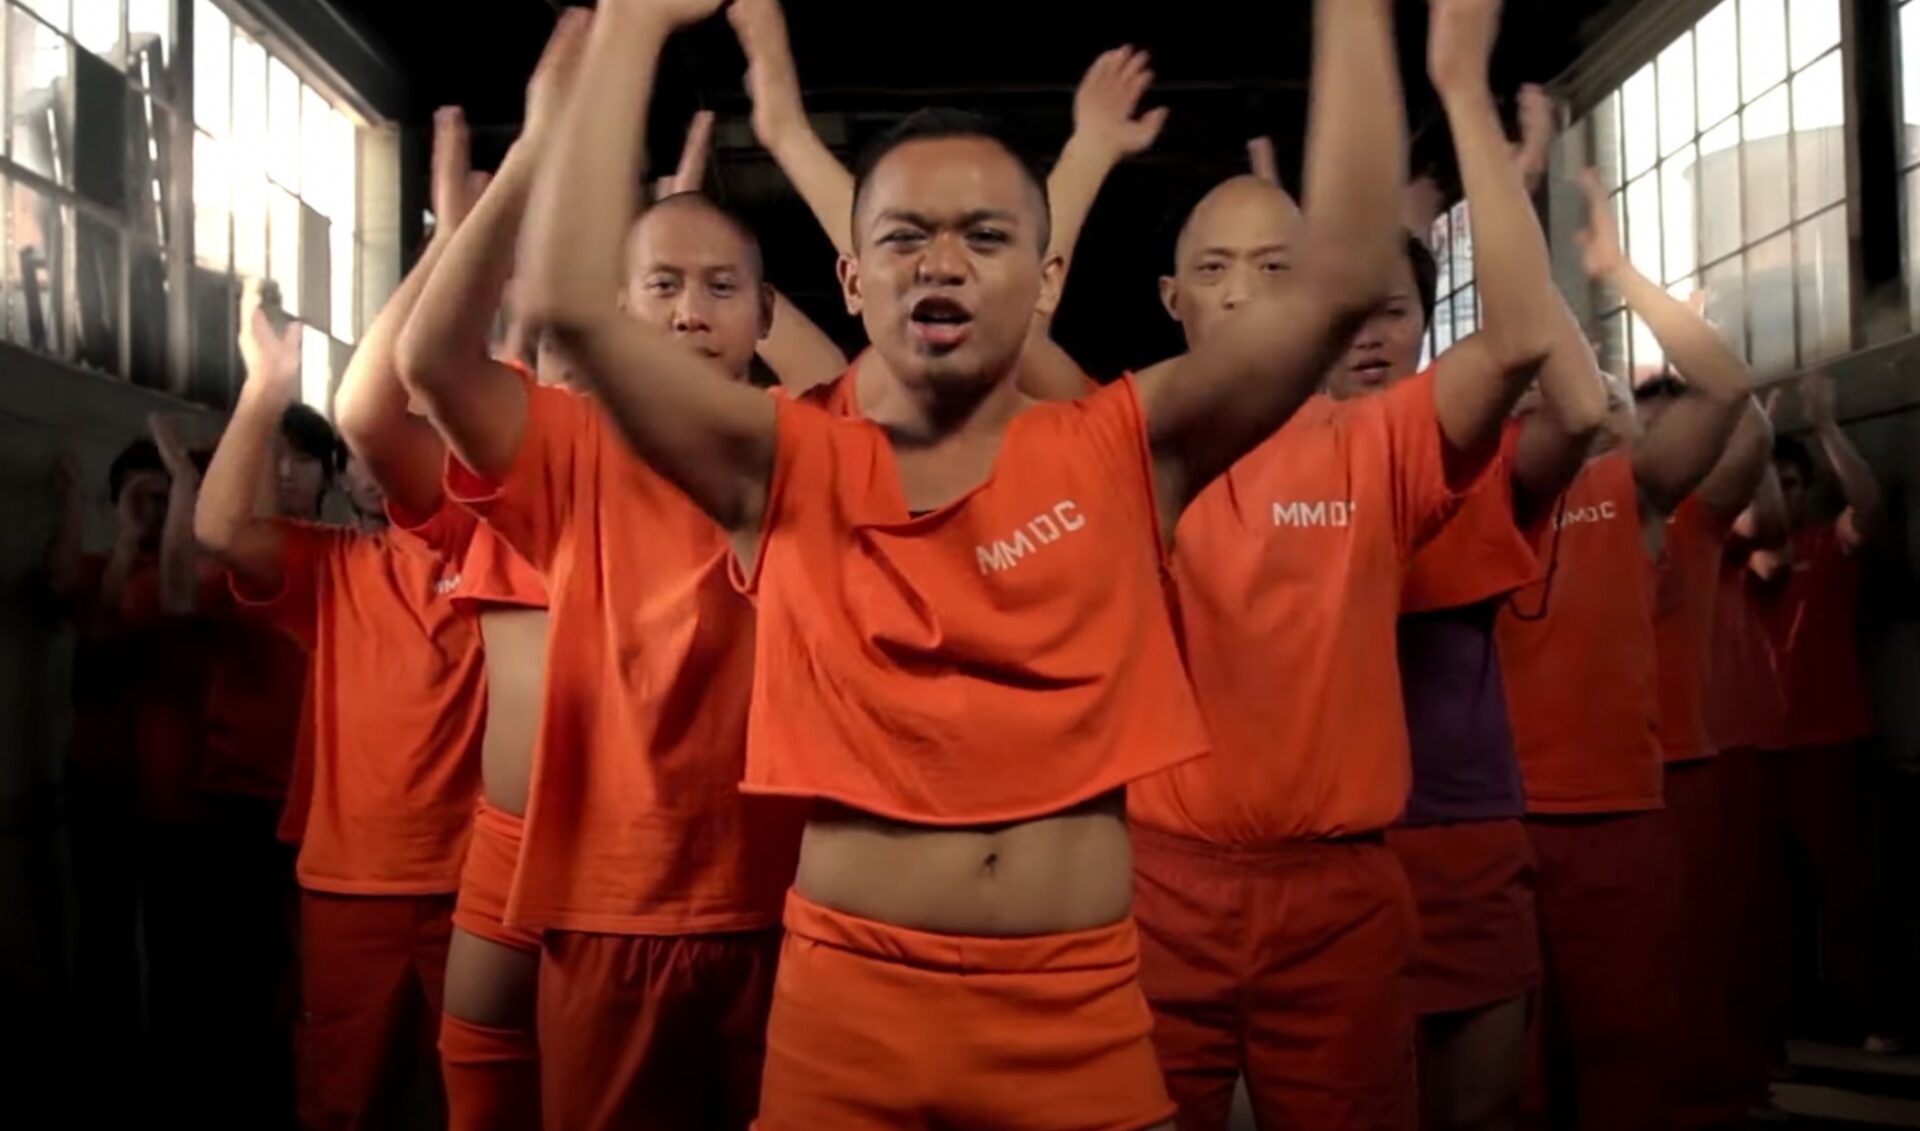 In 2007, Filipino inmates danced to ‘Thriller’ on YouTube. Their moves inspired a new musical.